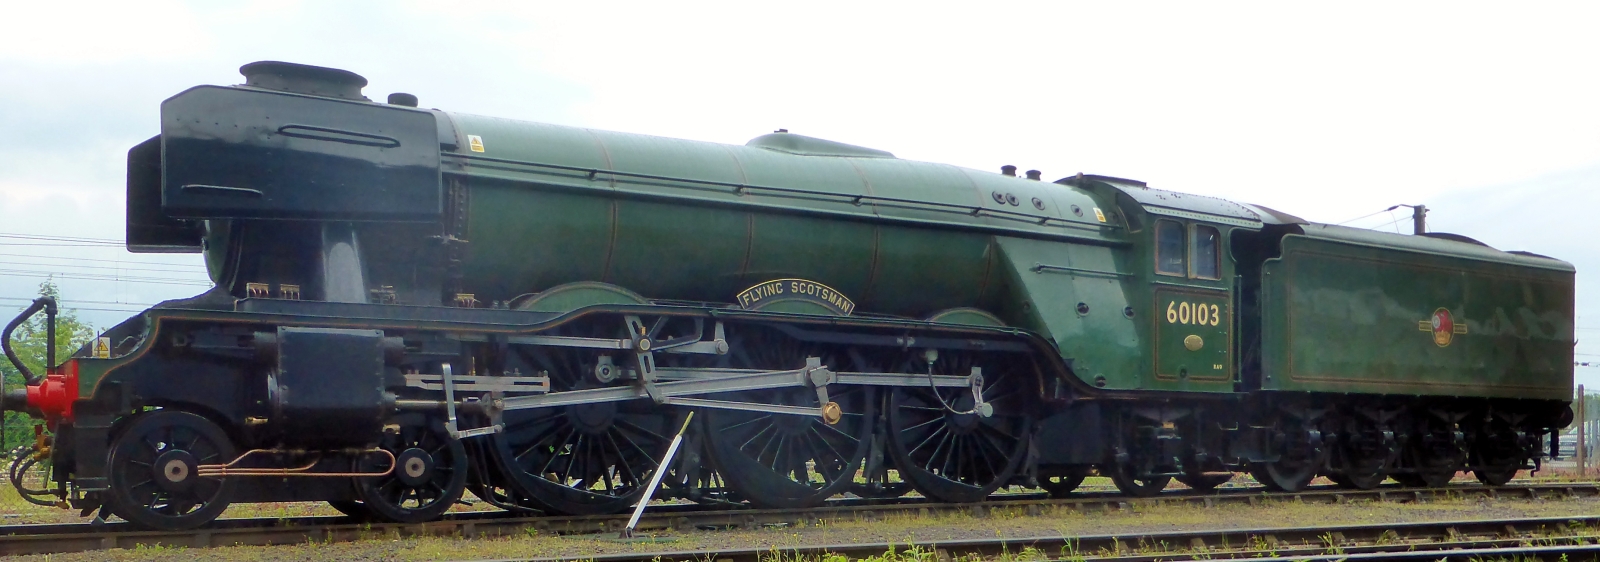 A3 No. 4472/60103 “Flying Scotsman” in York